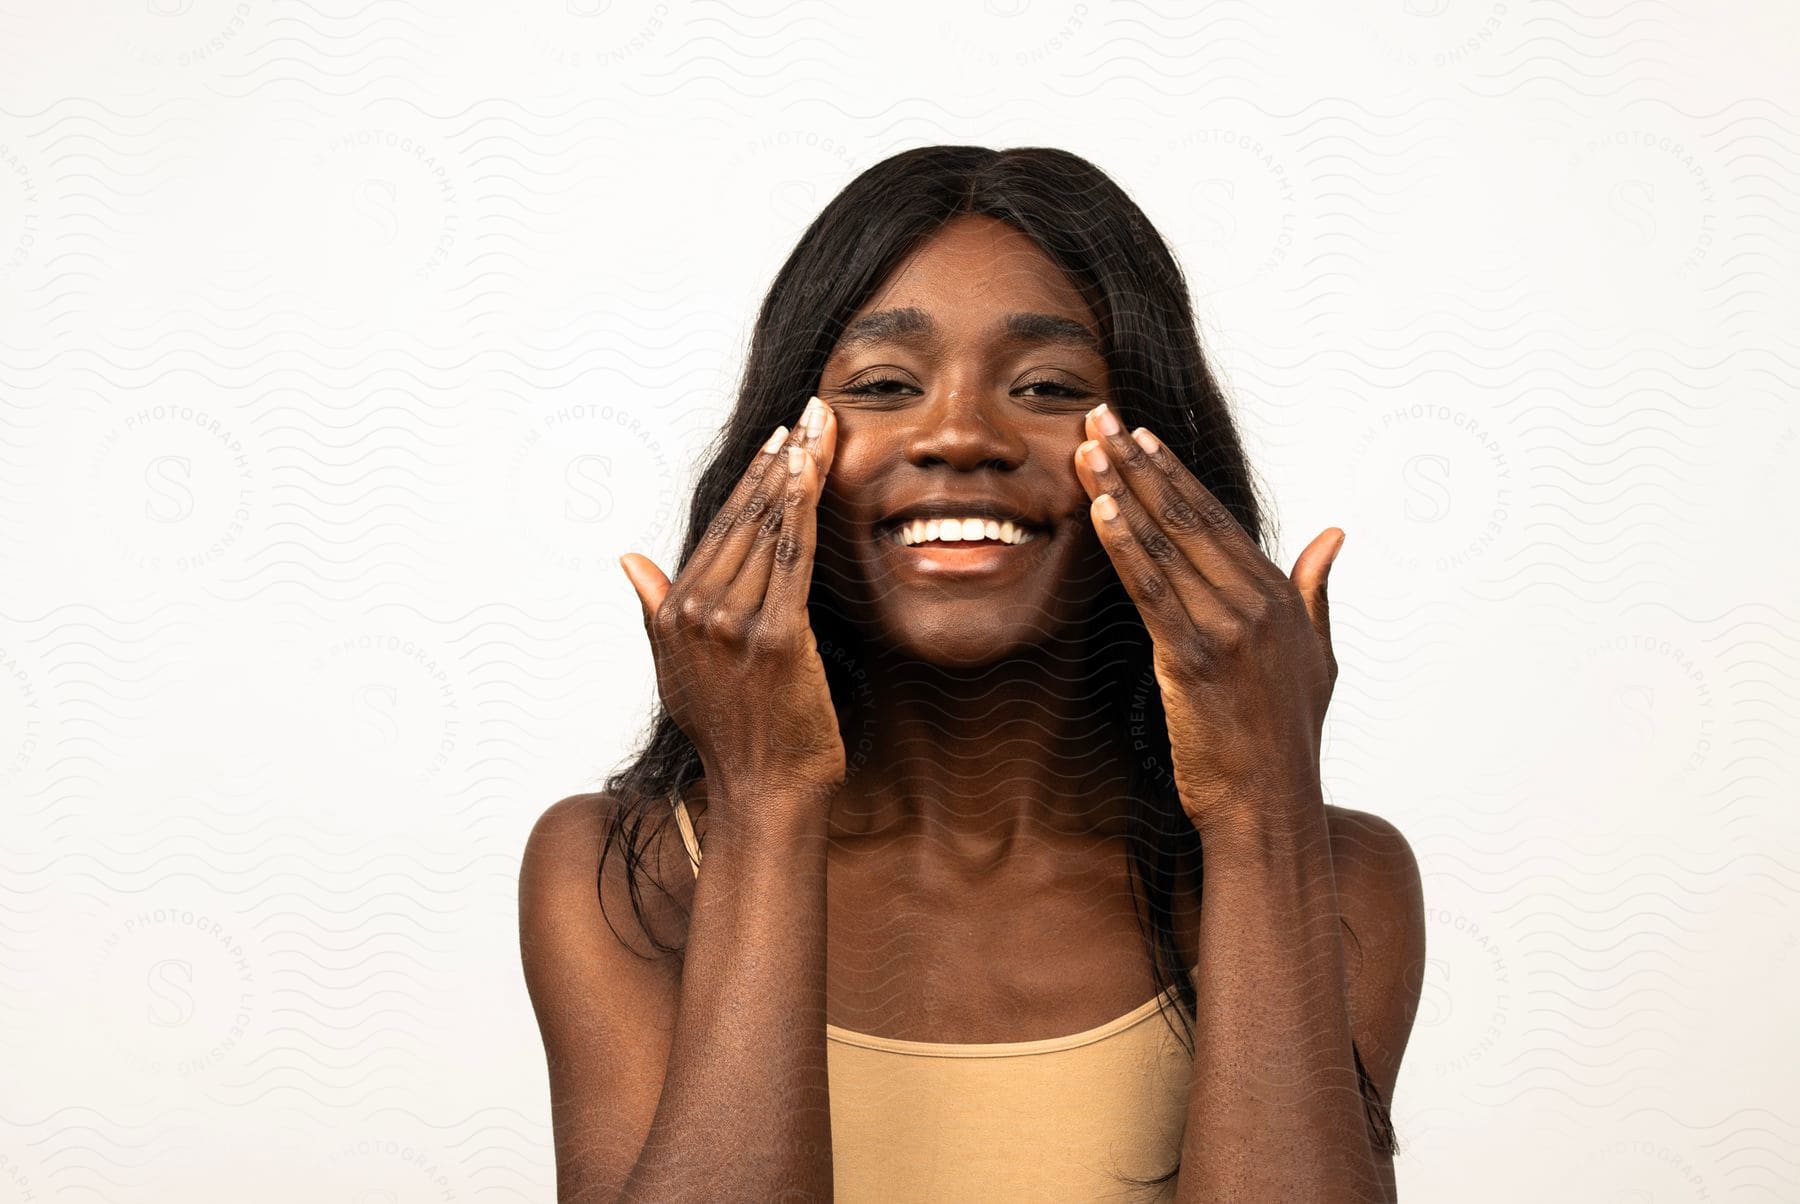 Woman applying facial cream, with a wide smile, against a light background.